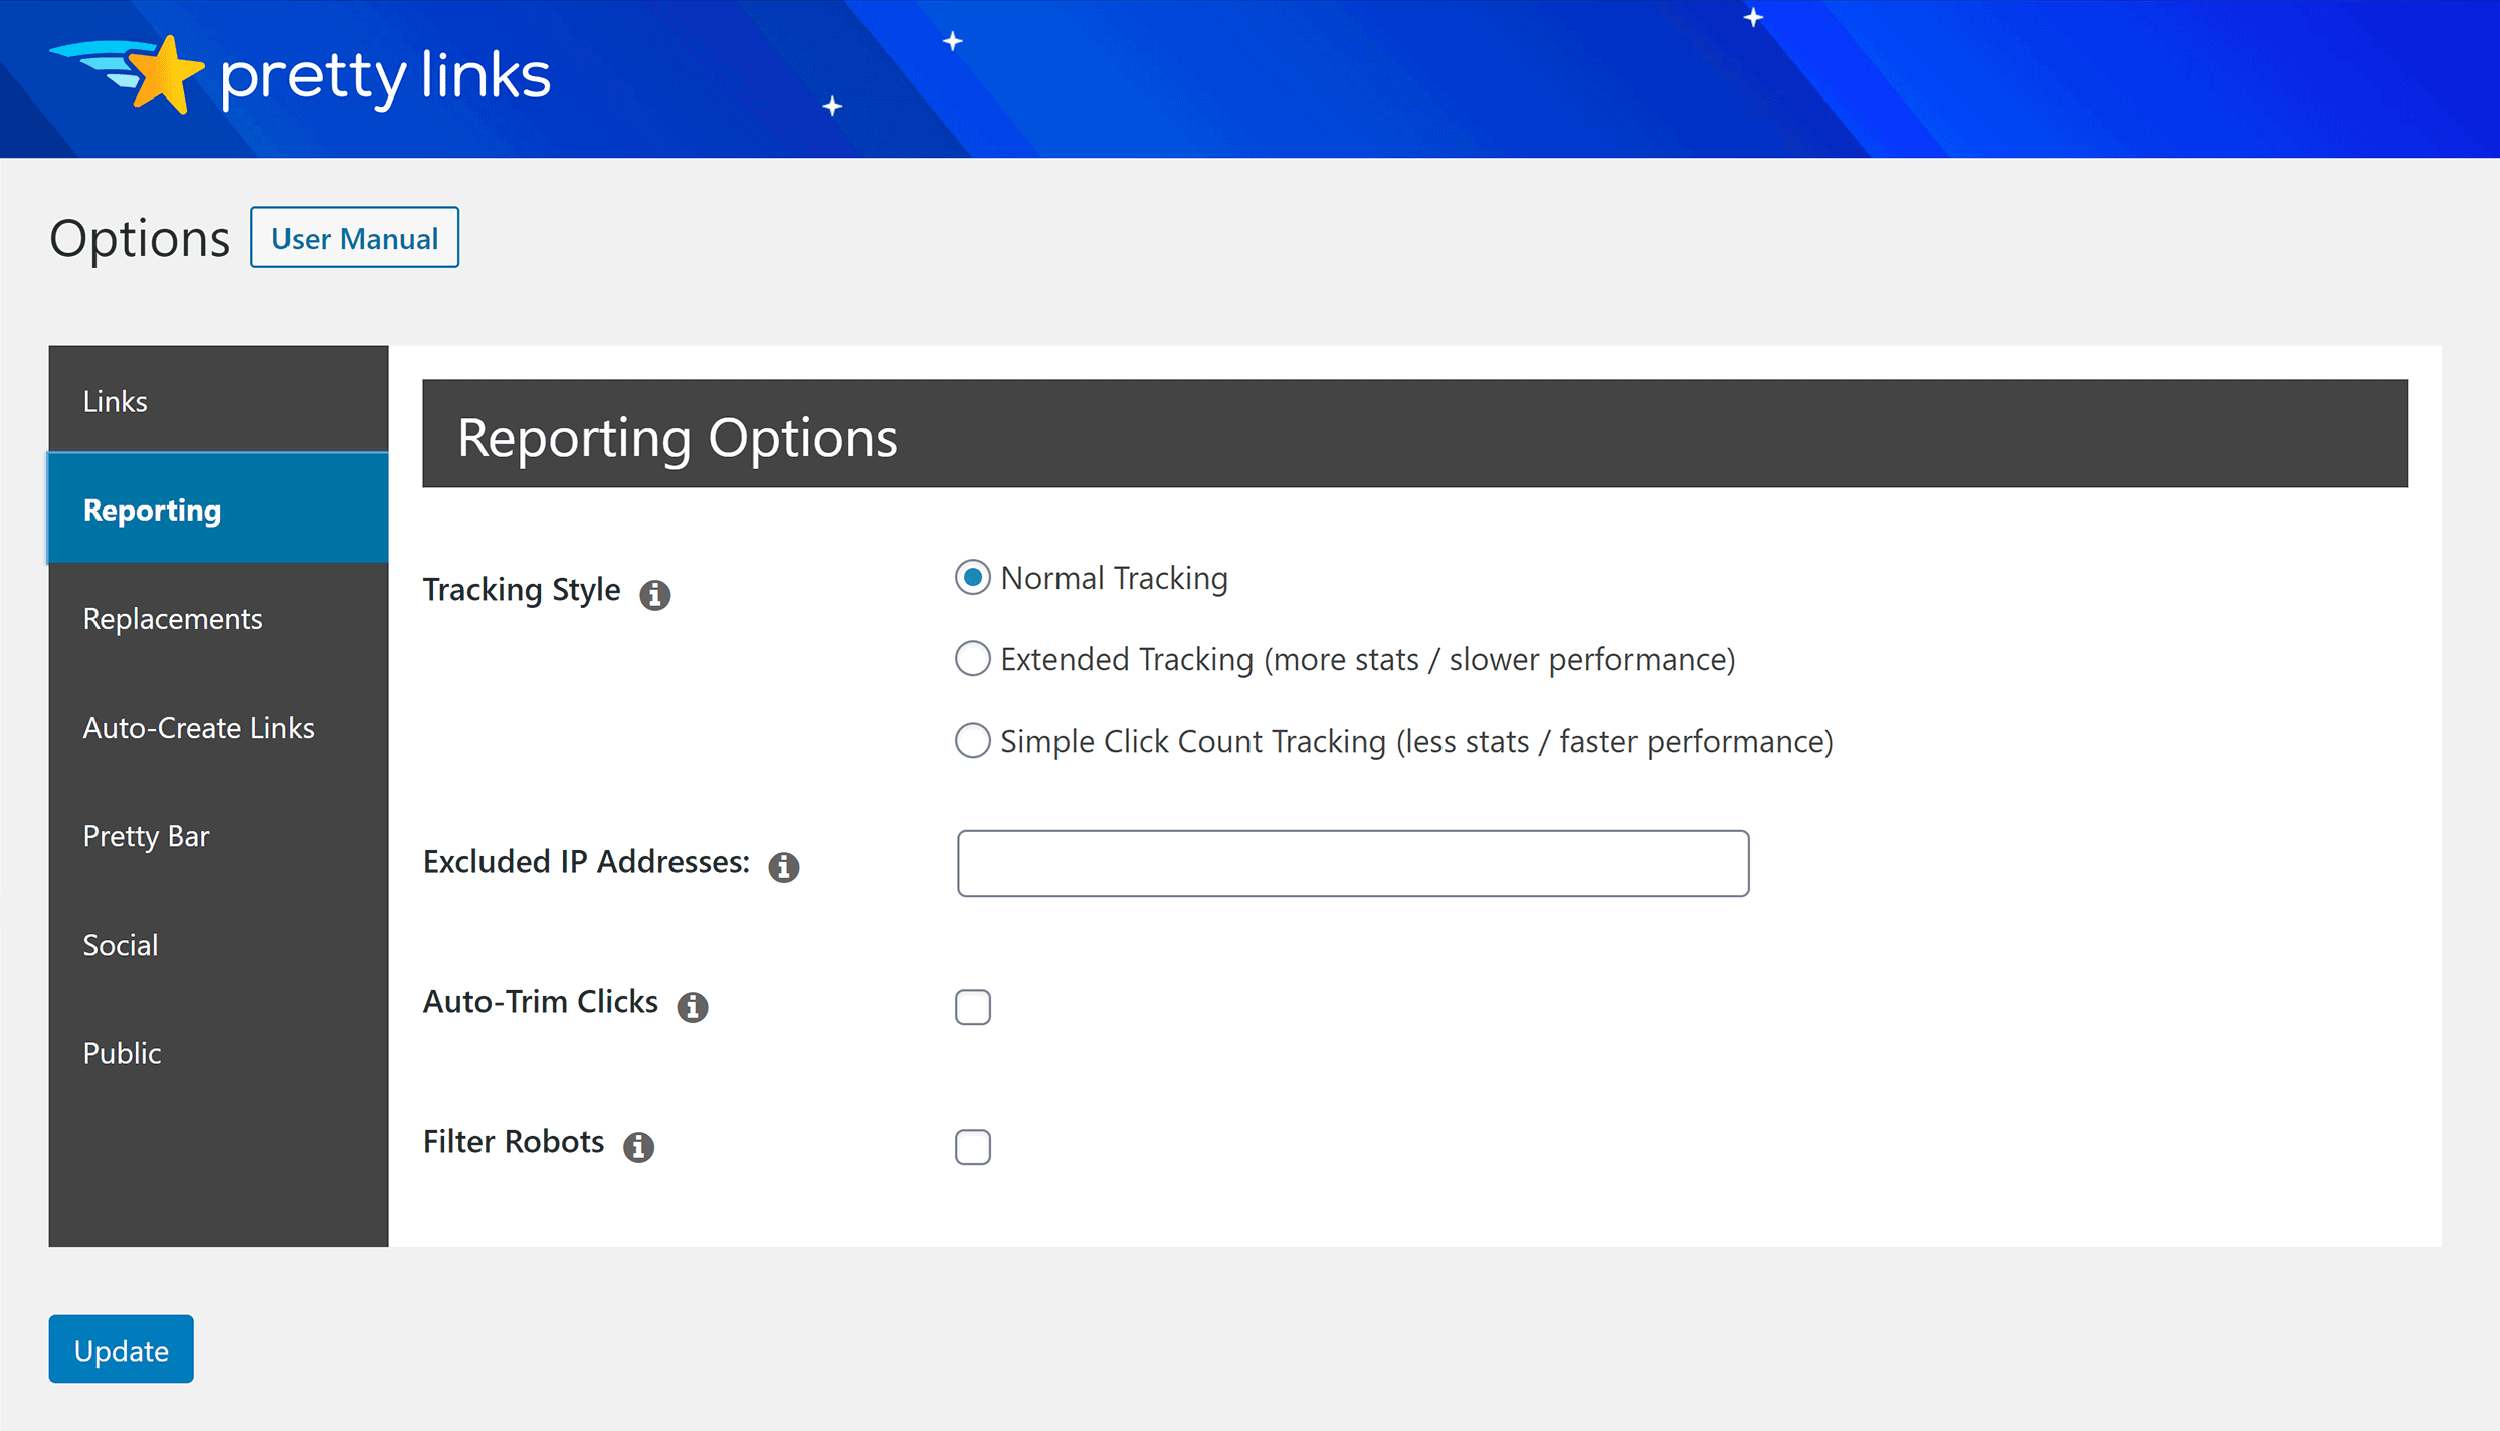 Reporting Options